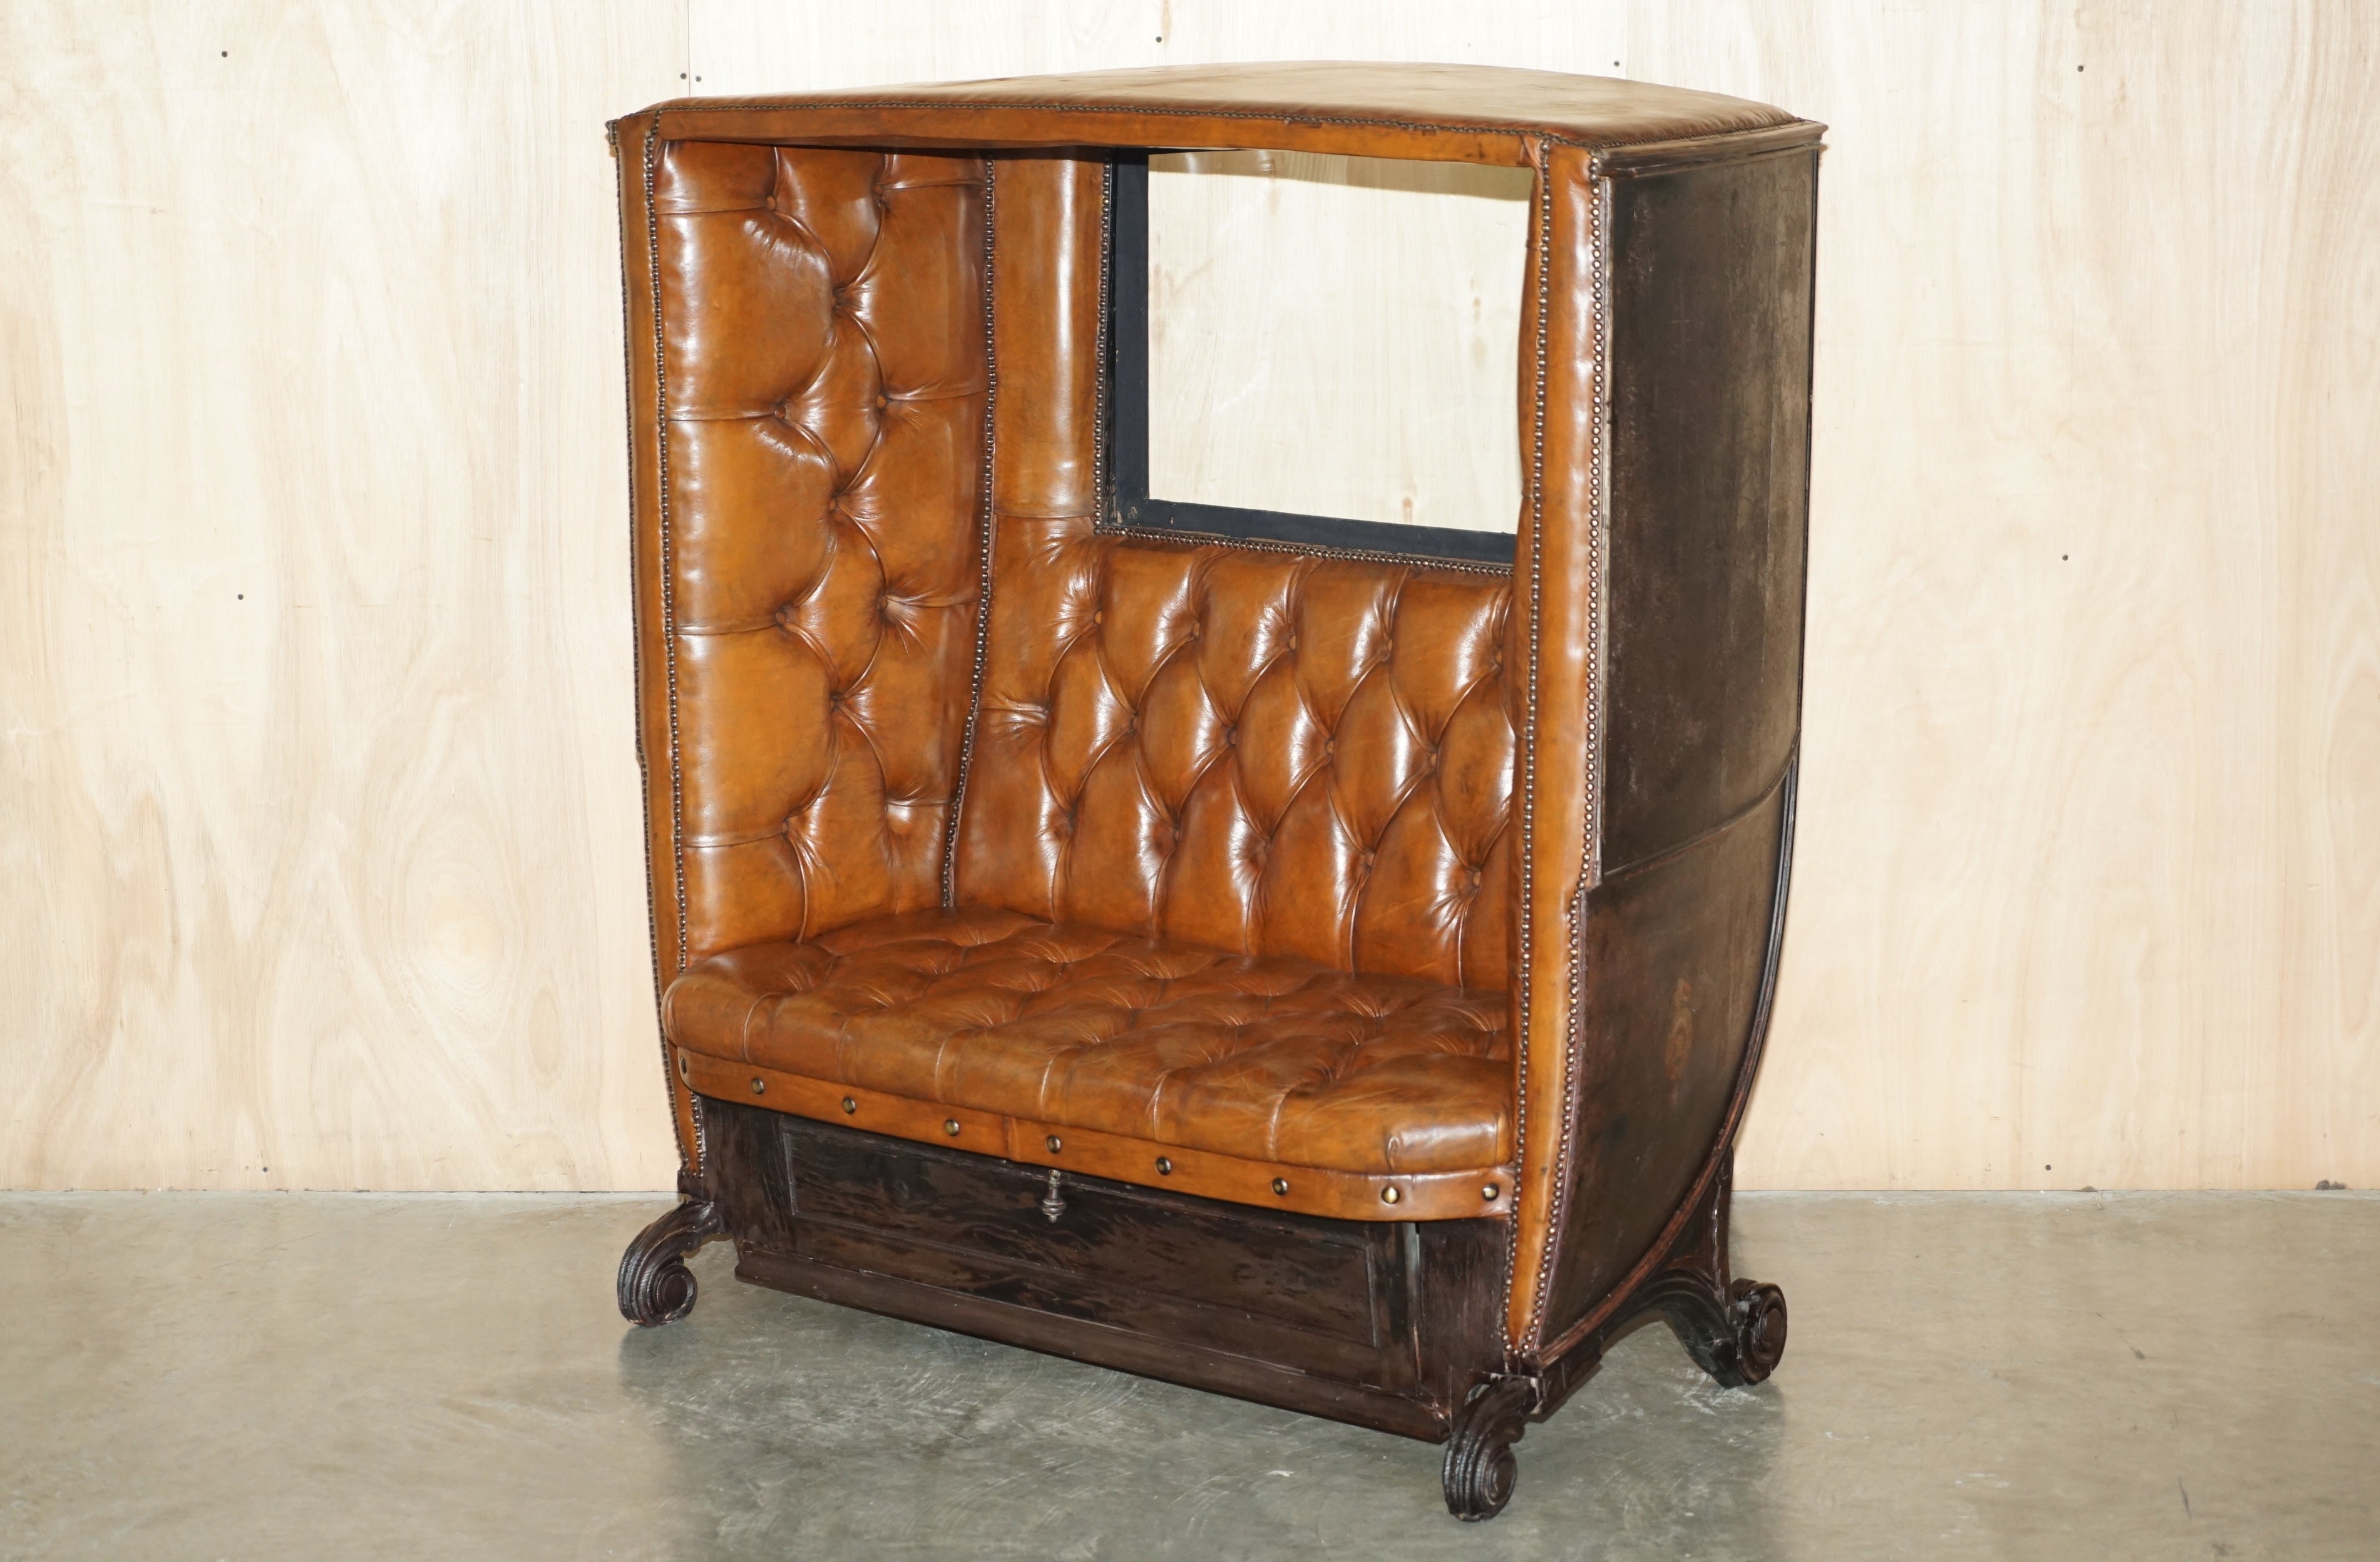 Royal House Antiques

Royal House Antiques is delighted to offer for sale this absolutely exquisite, super rare, fully restored High Victorian carriage coach seat which can be used as a bench sofa with Royal, Armorial Coat of Arms painted on the